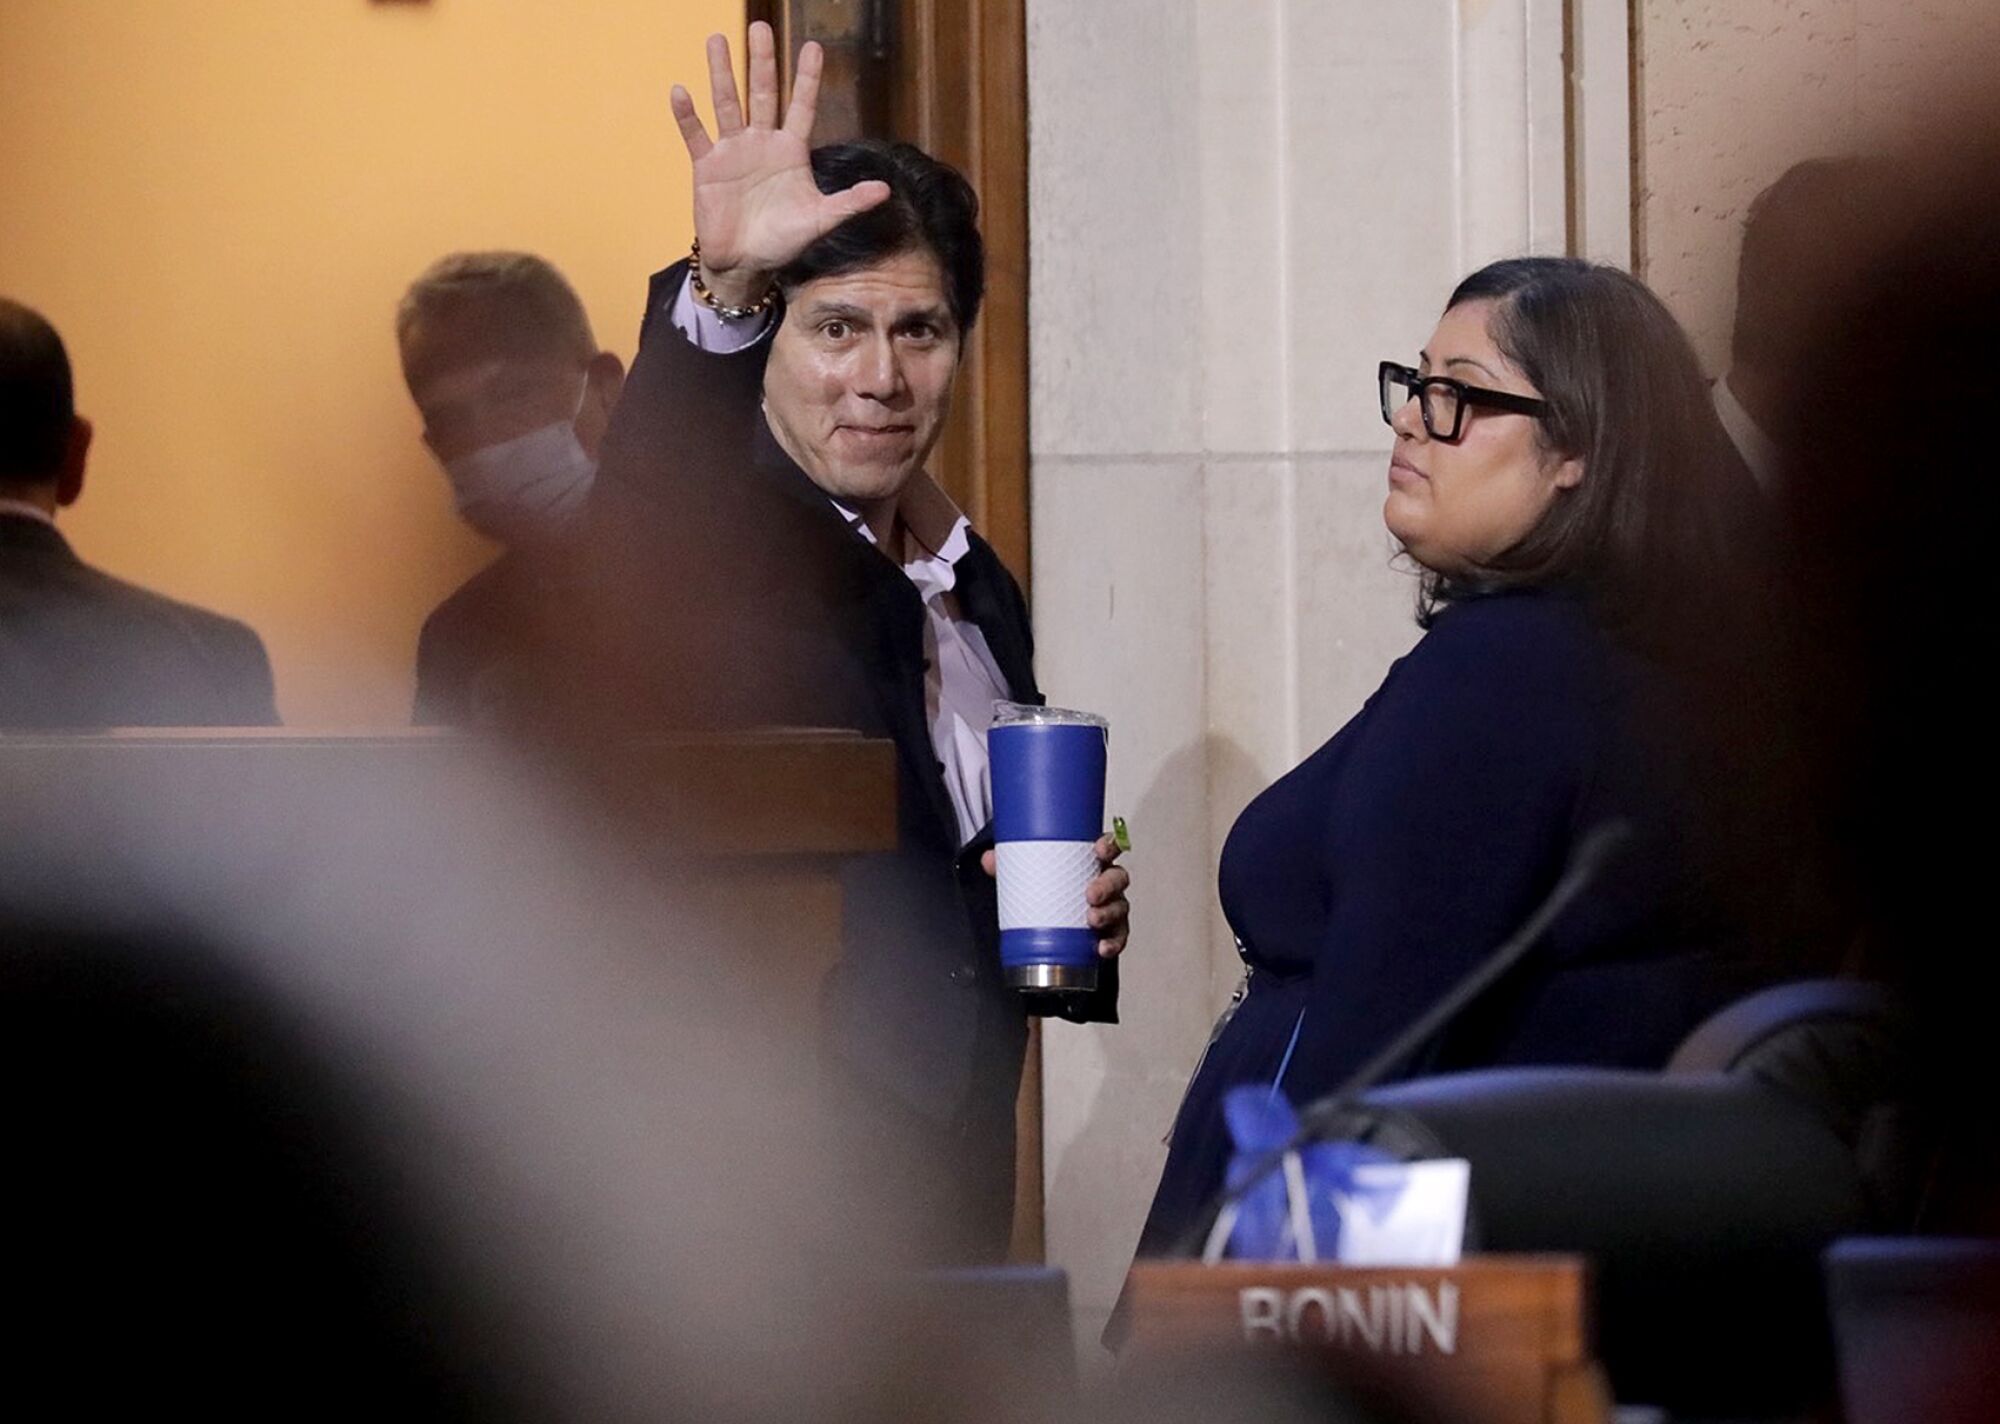 Councilmember Kevin de León waves during a council meeting as other people look on.